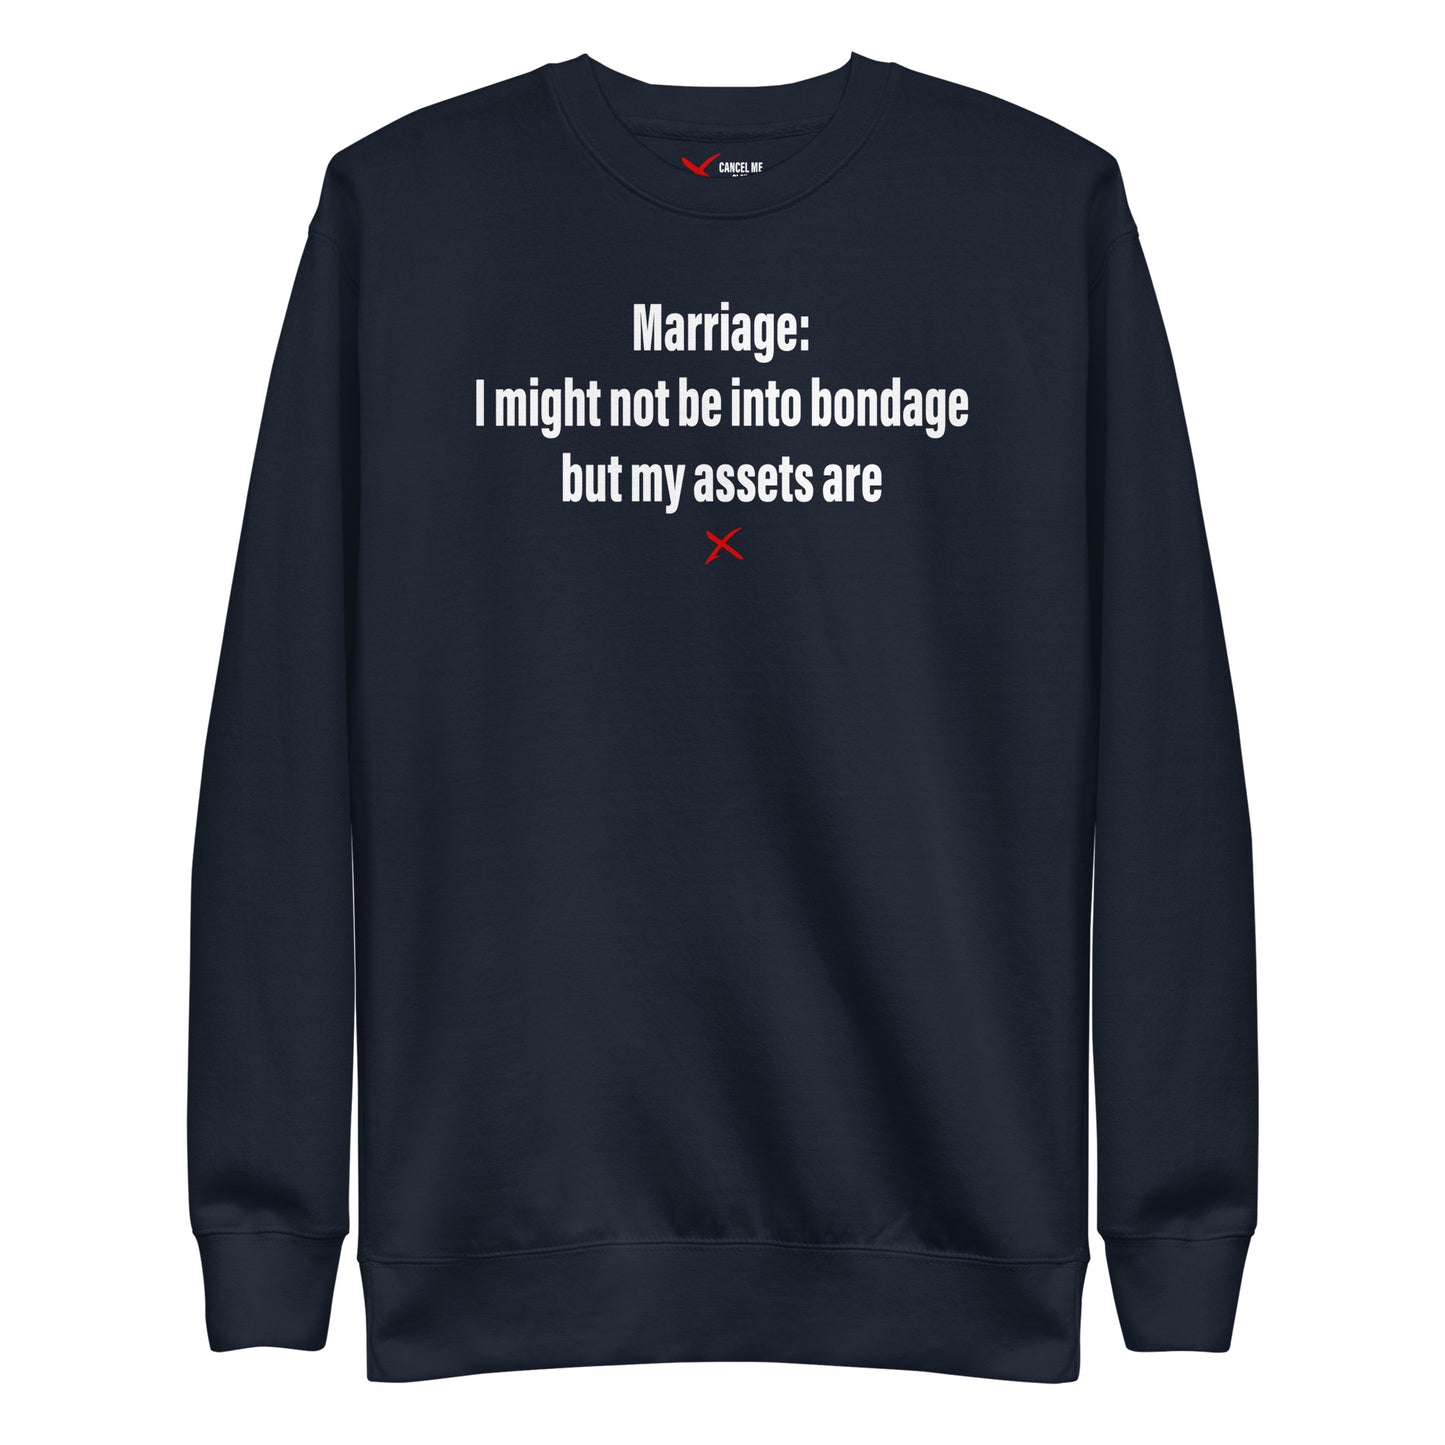 Marriage: I might not be into bondage but my assets are - Sweatshirt